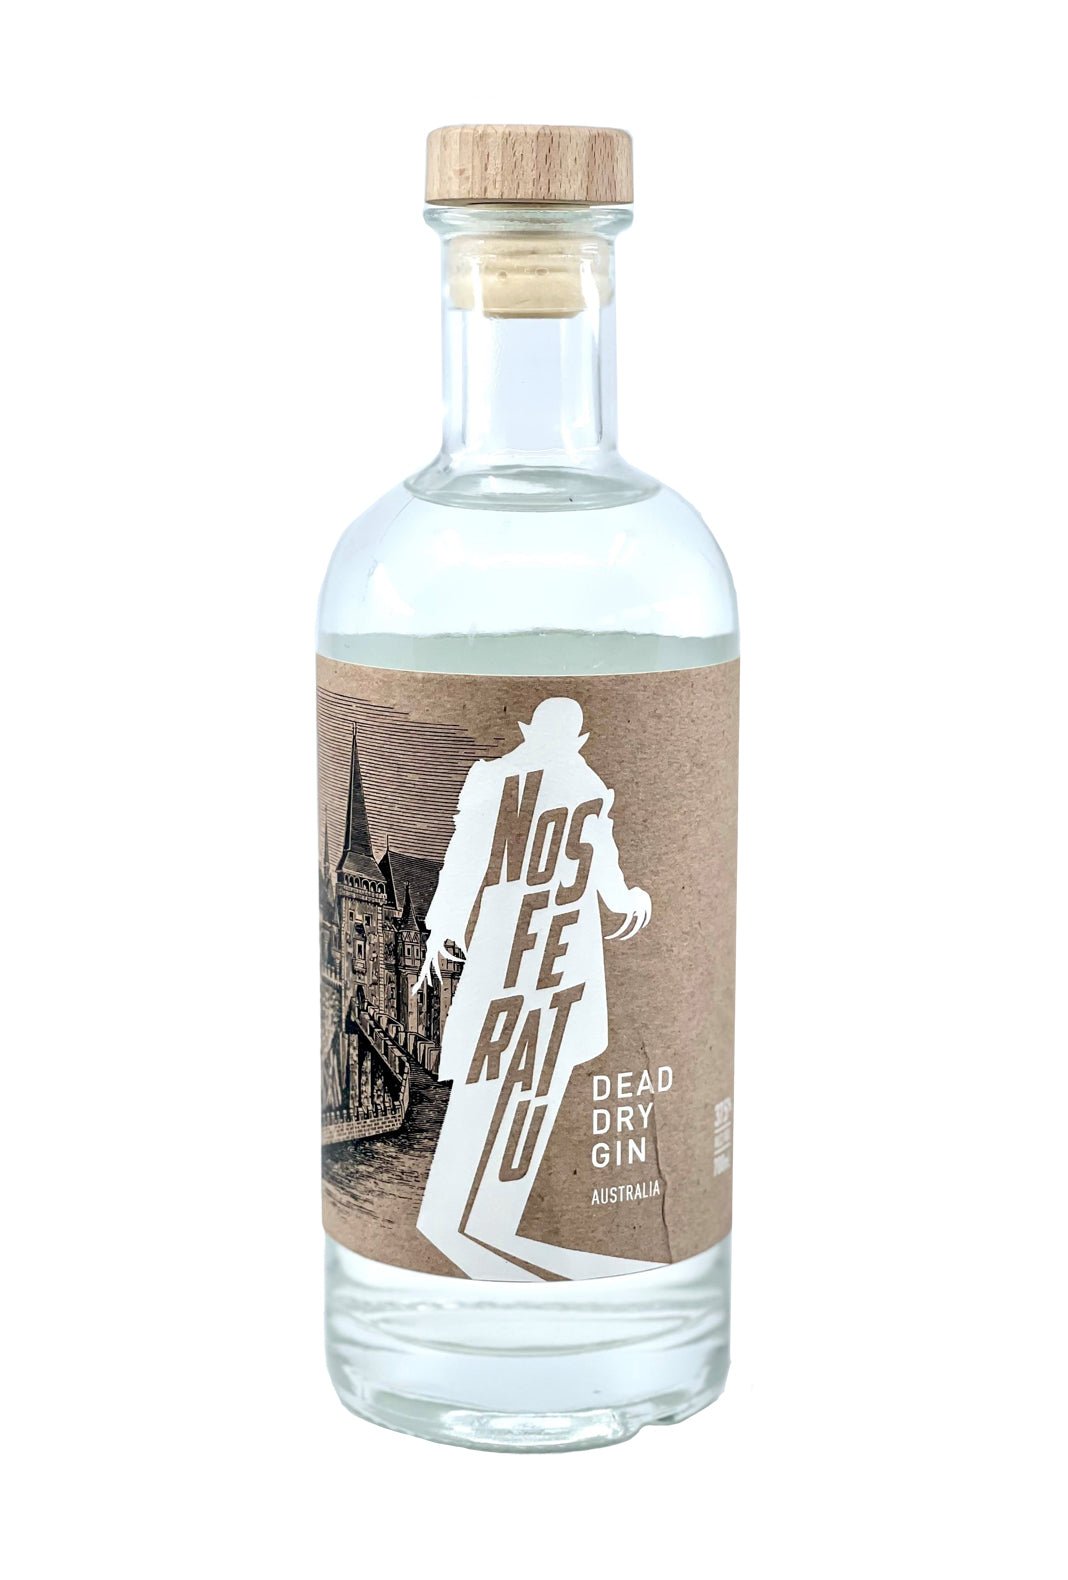 Dead Dry Gin 37.5% 700ml | Gin | Shop online at Spirits of France